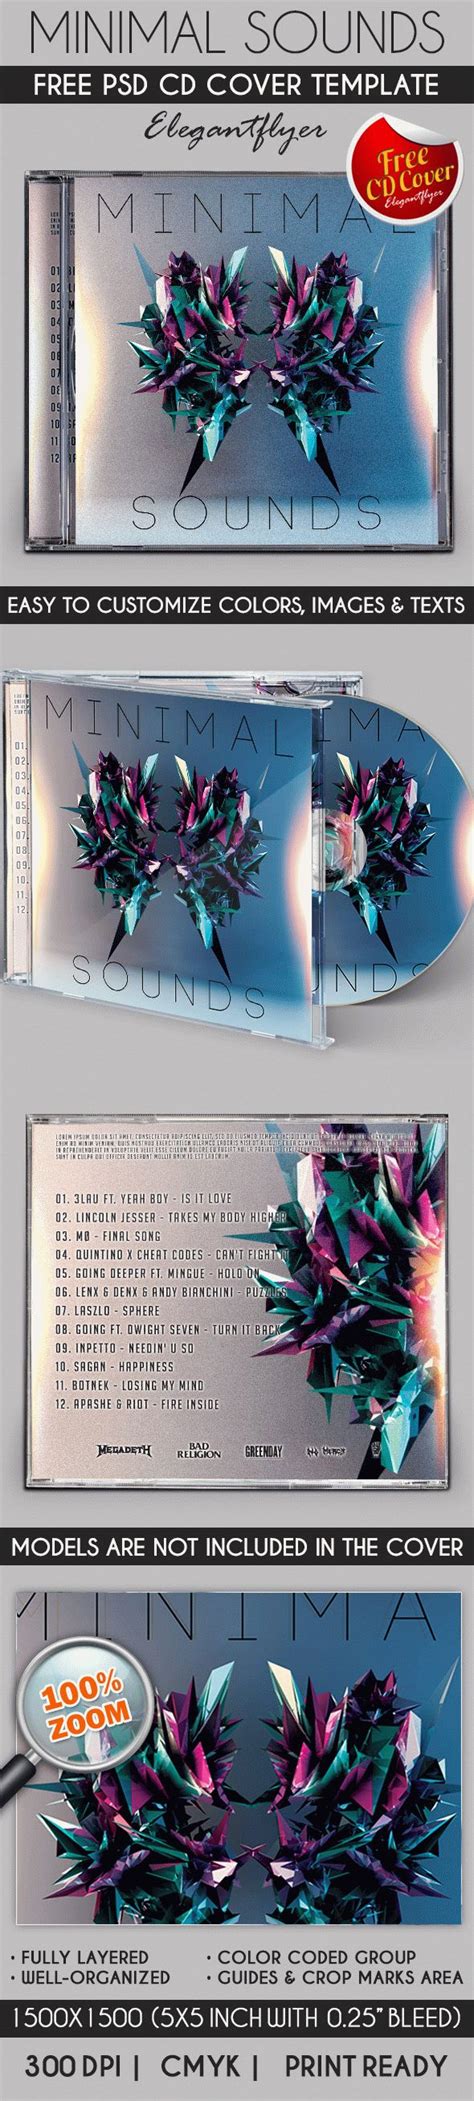 Minimal Sound Free Cd Cover Psd Template Sound Free Dvd Covers Psd